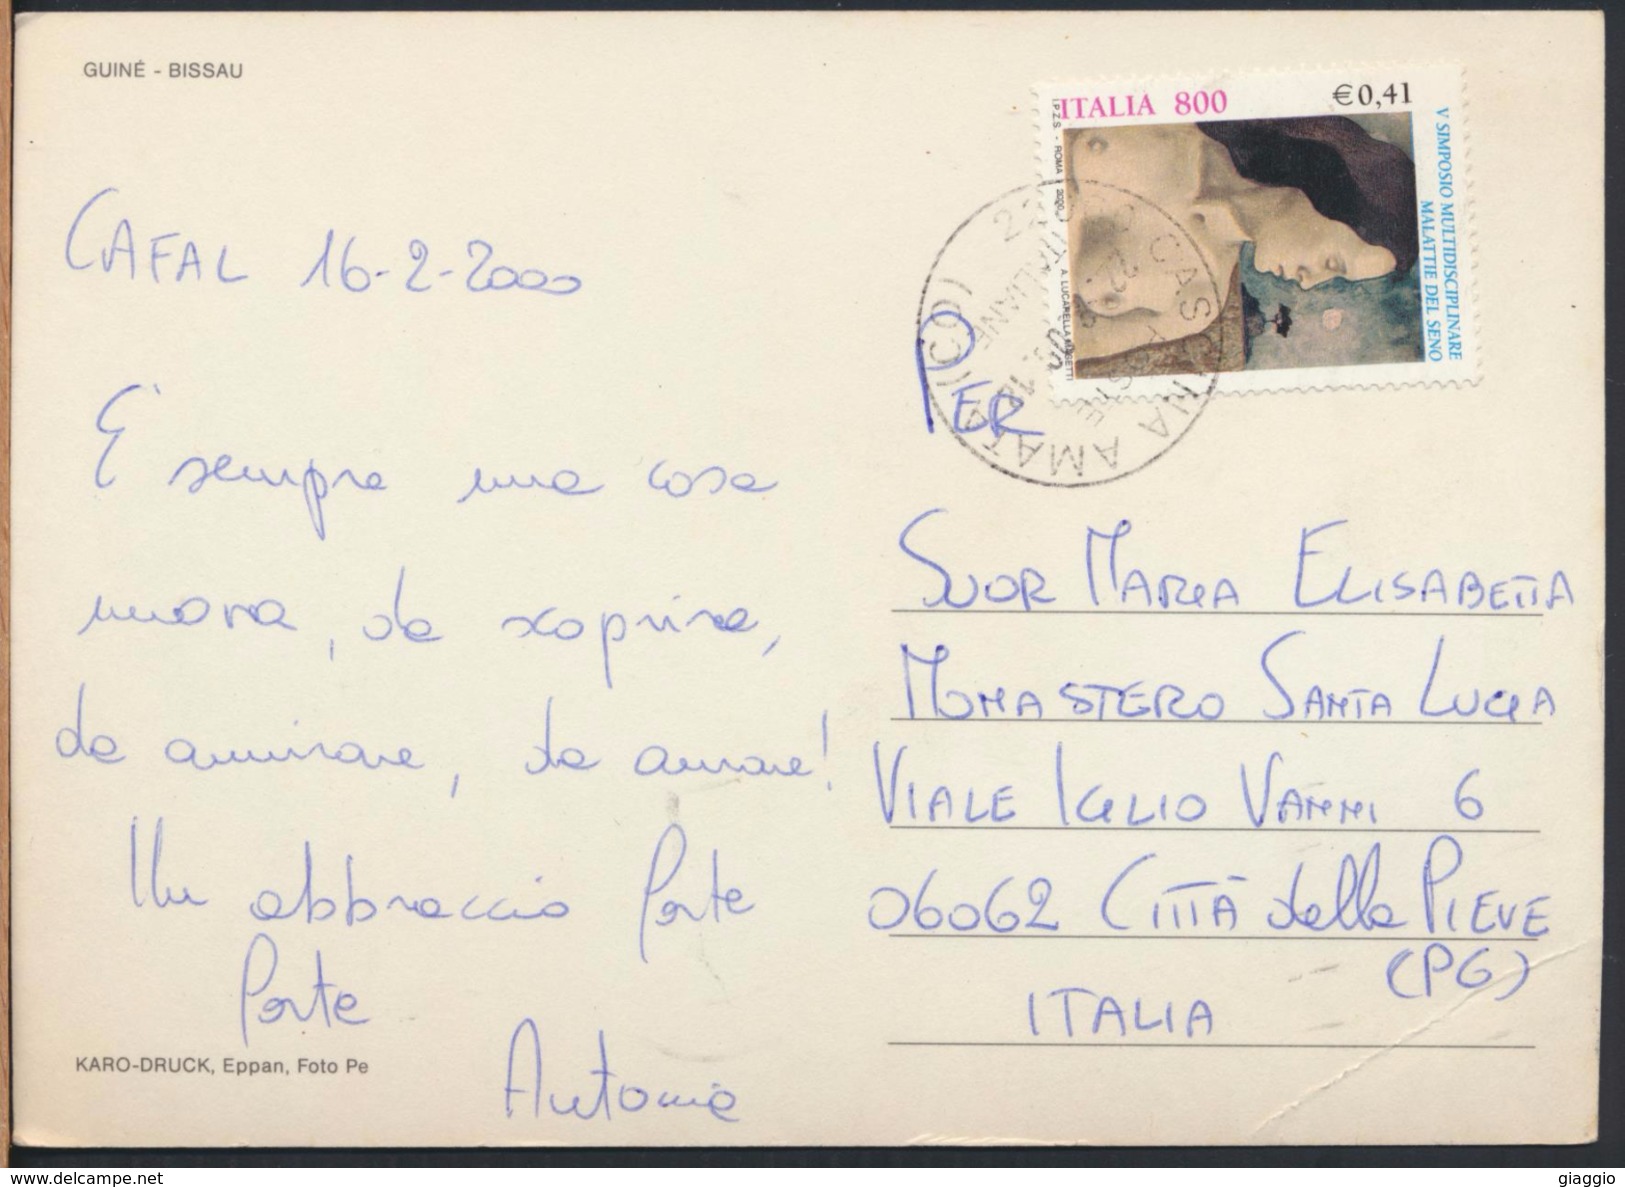 °°° 3996 - GUINE-BISSAU - MOTHER AND SON - With Stamps °°° - Guinea Bissau